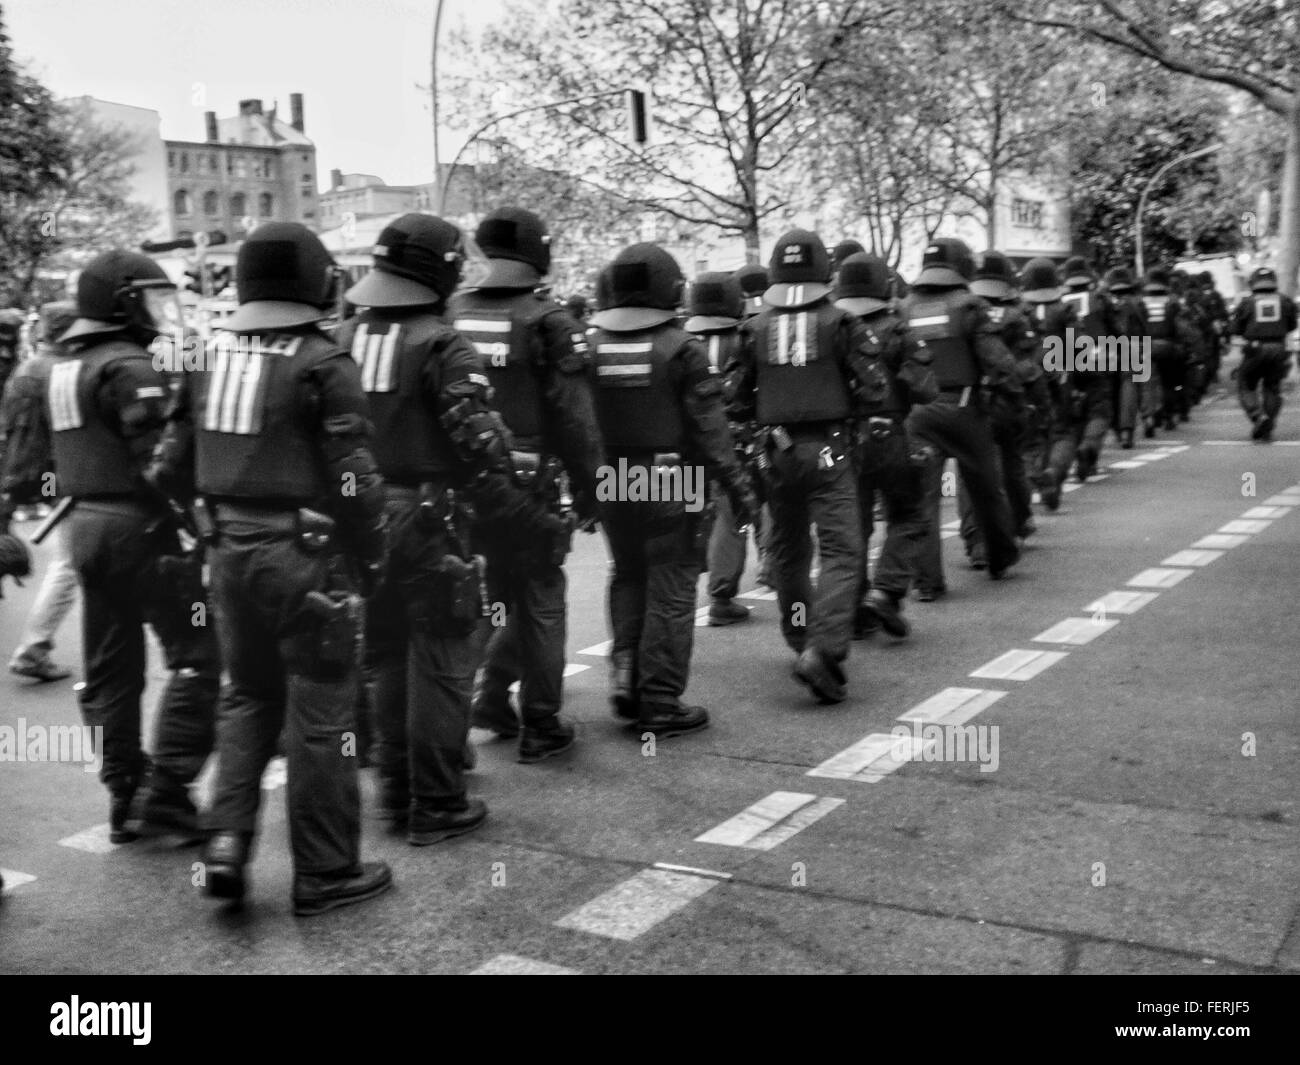 Police Unit Riot Police High Resolution Stock Photography and Images ...